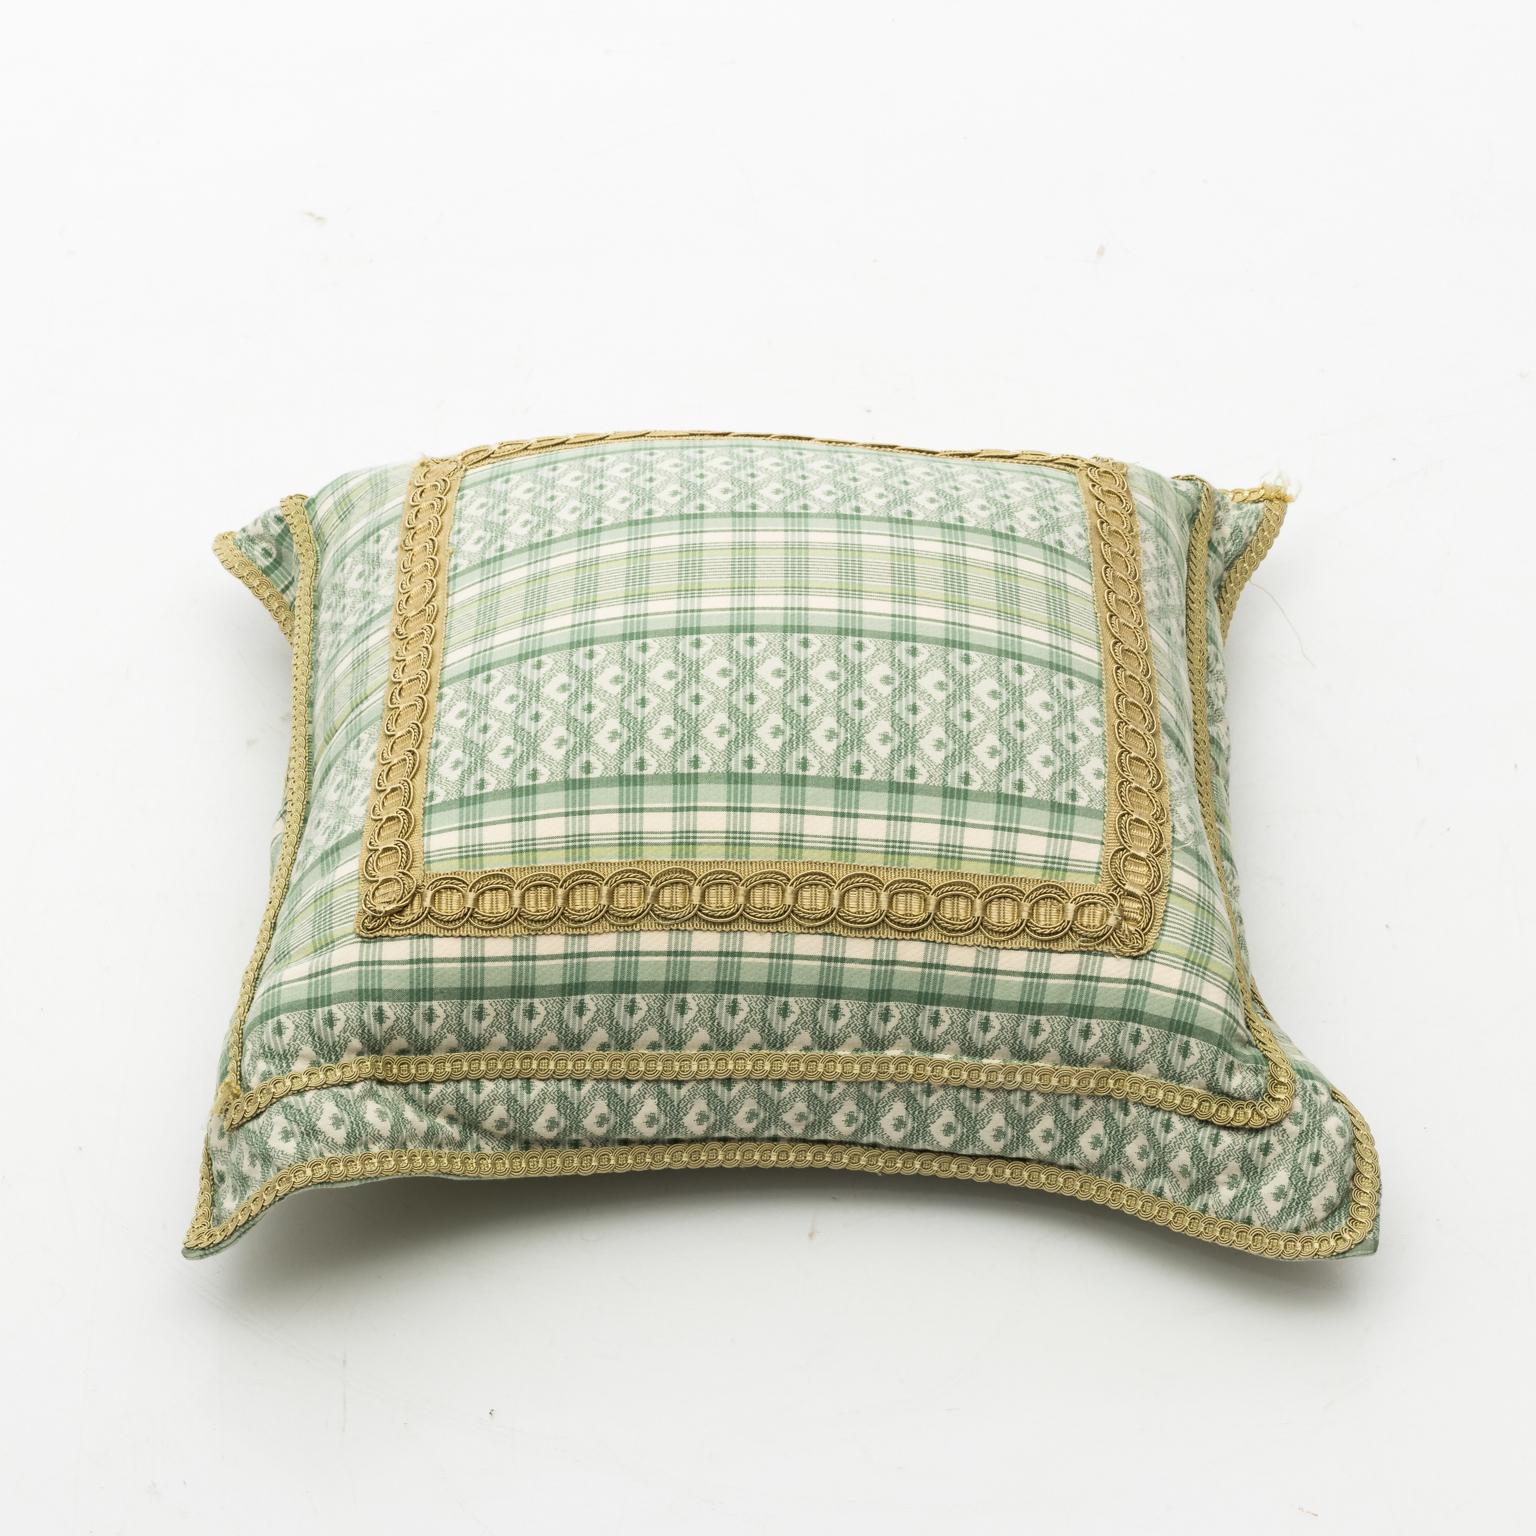 Decorative Green and White Pillows 1